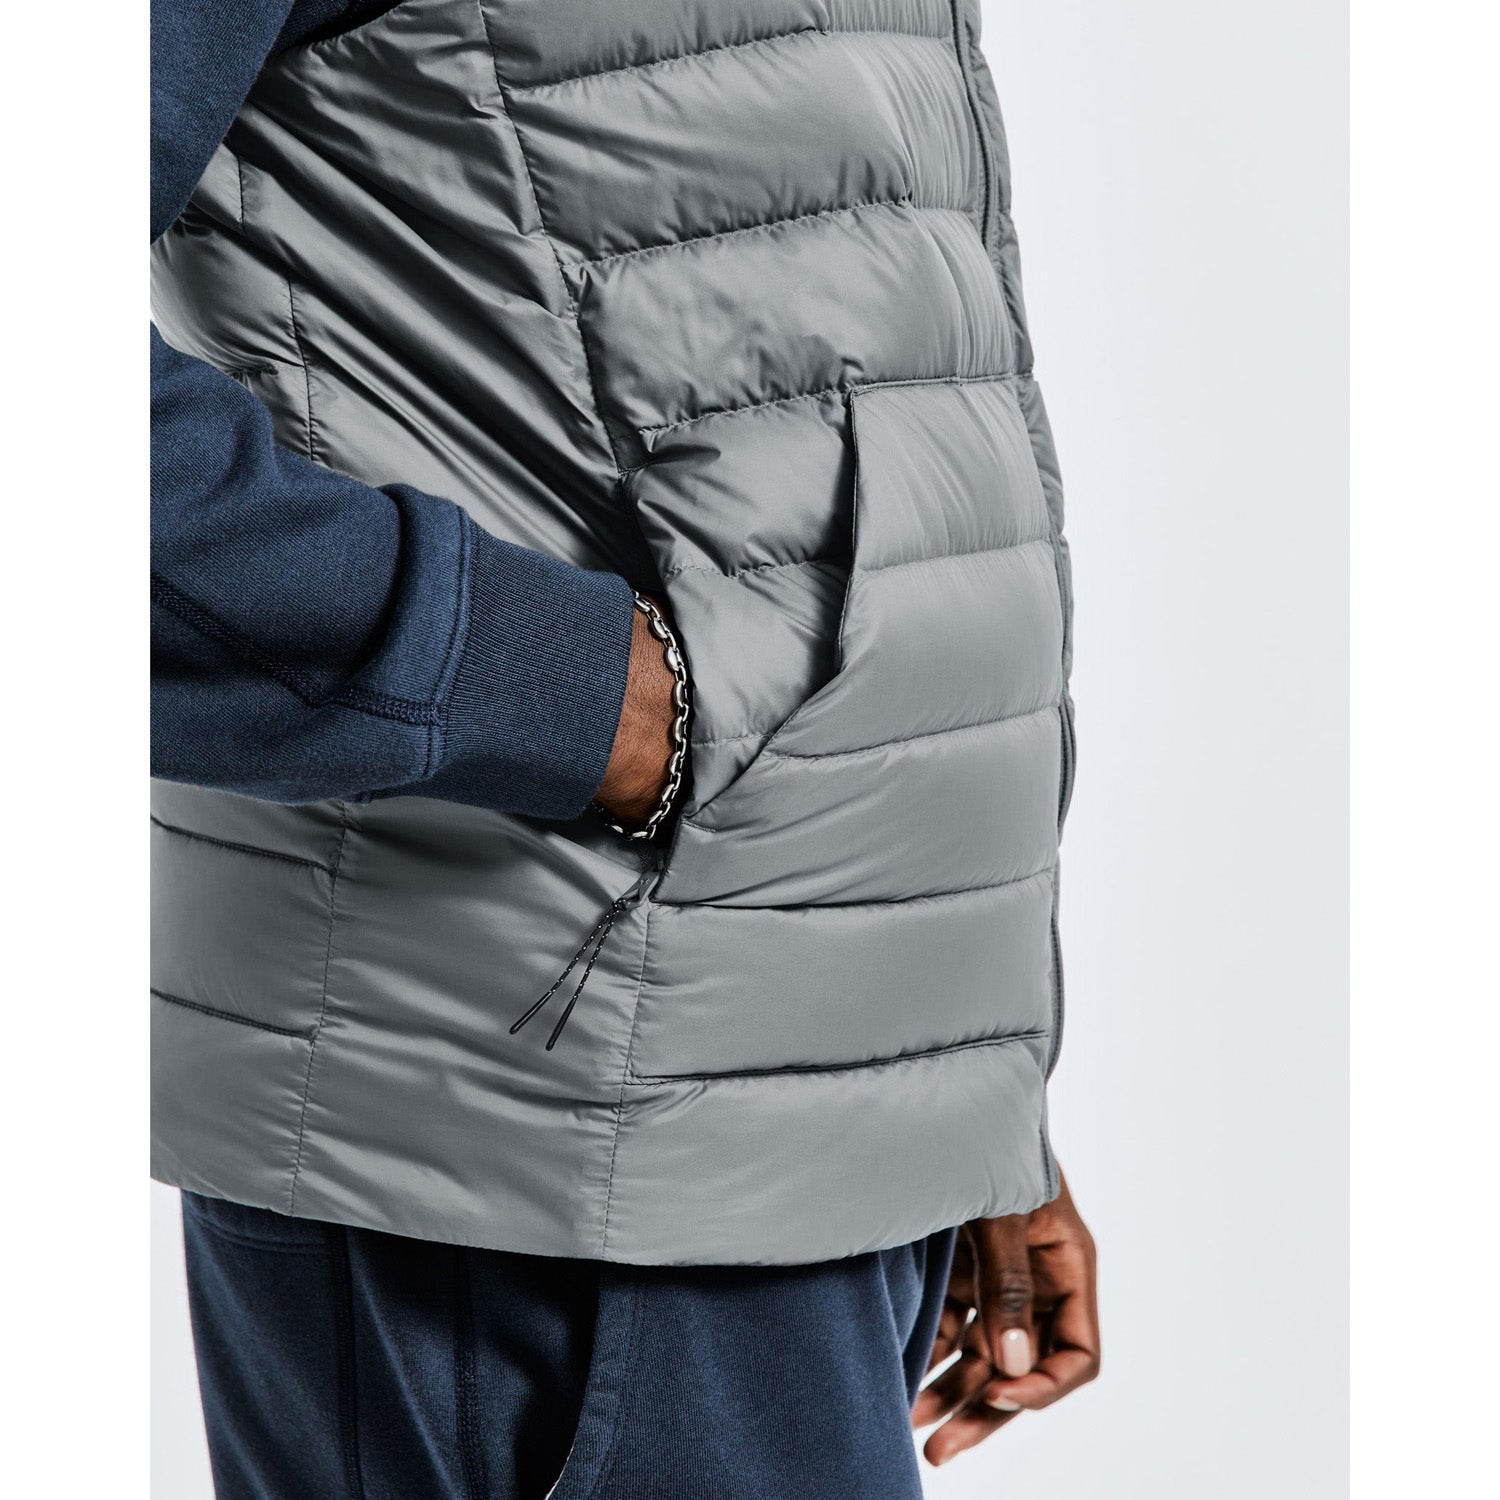 Reigning Champ Men Woven Warm-Up Downfill Vest Carbon RC-4237-CBN - OUTERWEAR - Canada